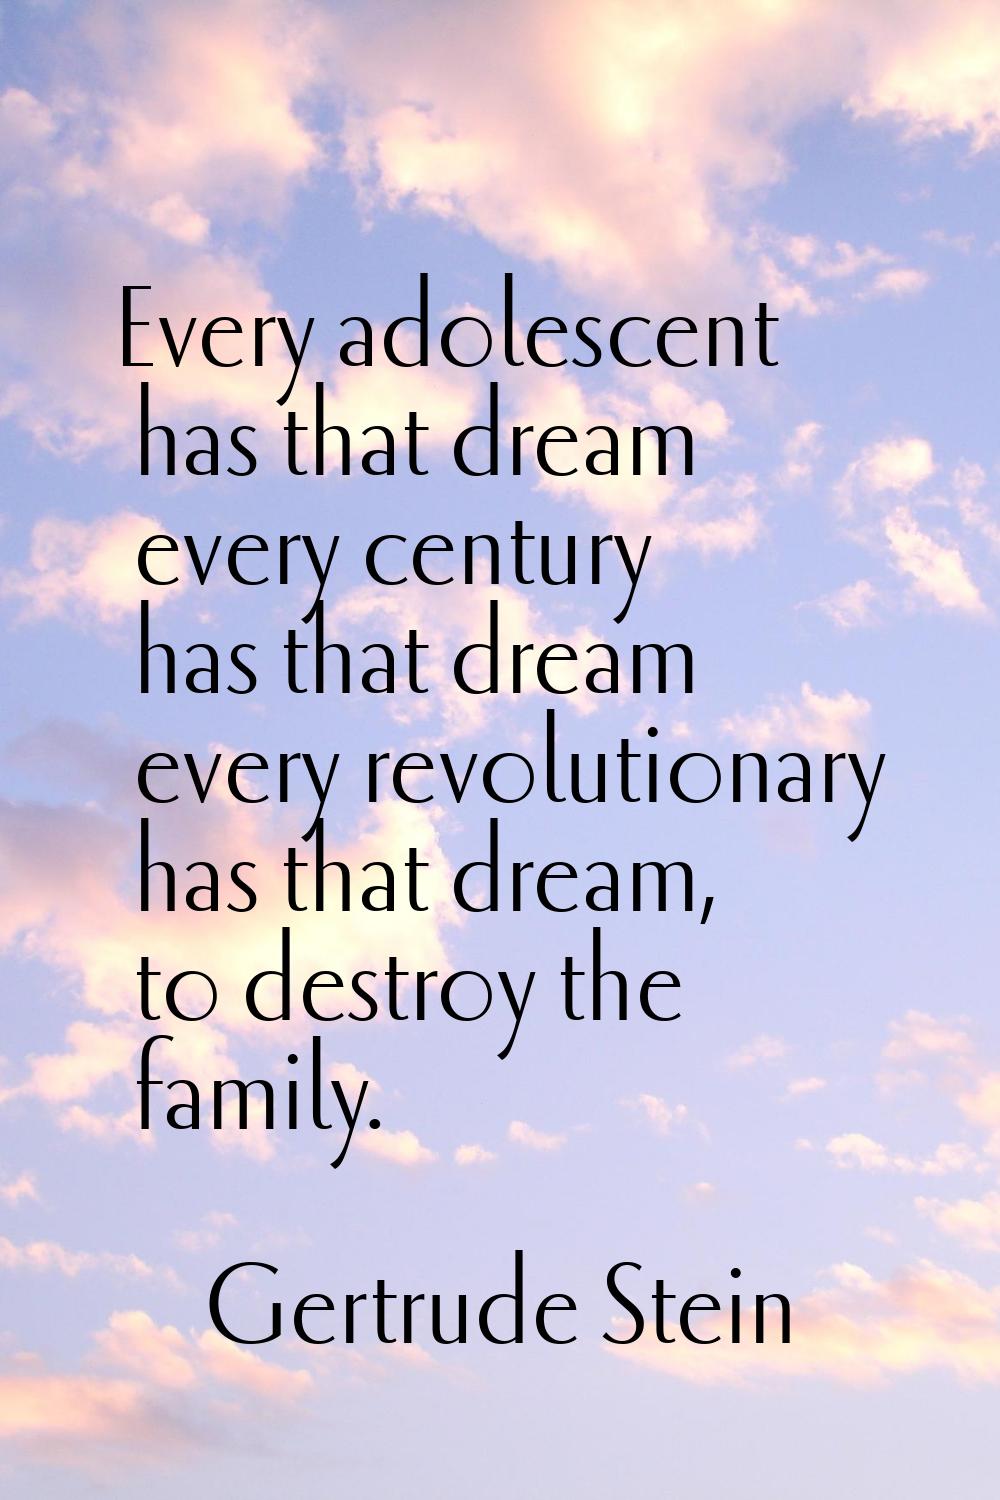 Every adolescent has that dream every century has that dream every revolutionary has that dream, to